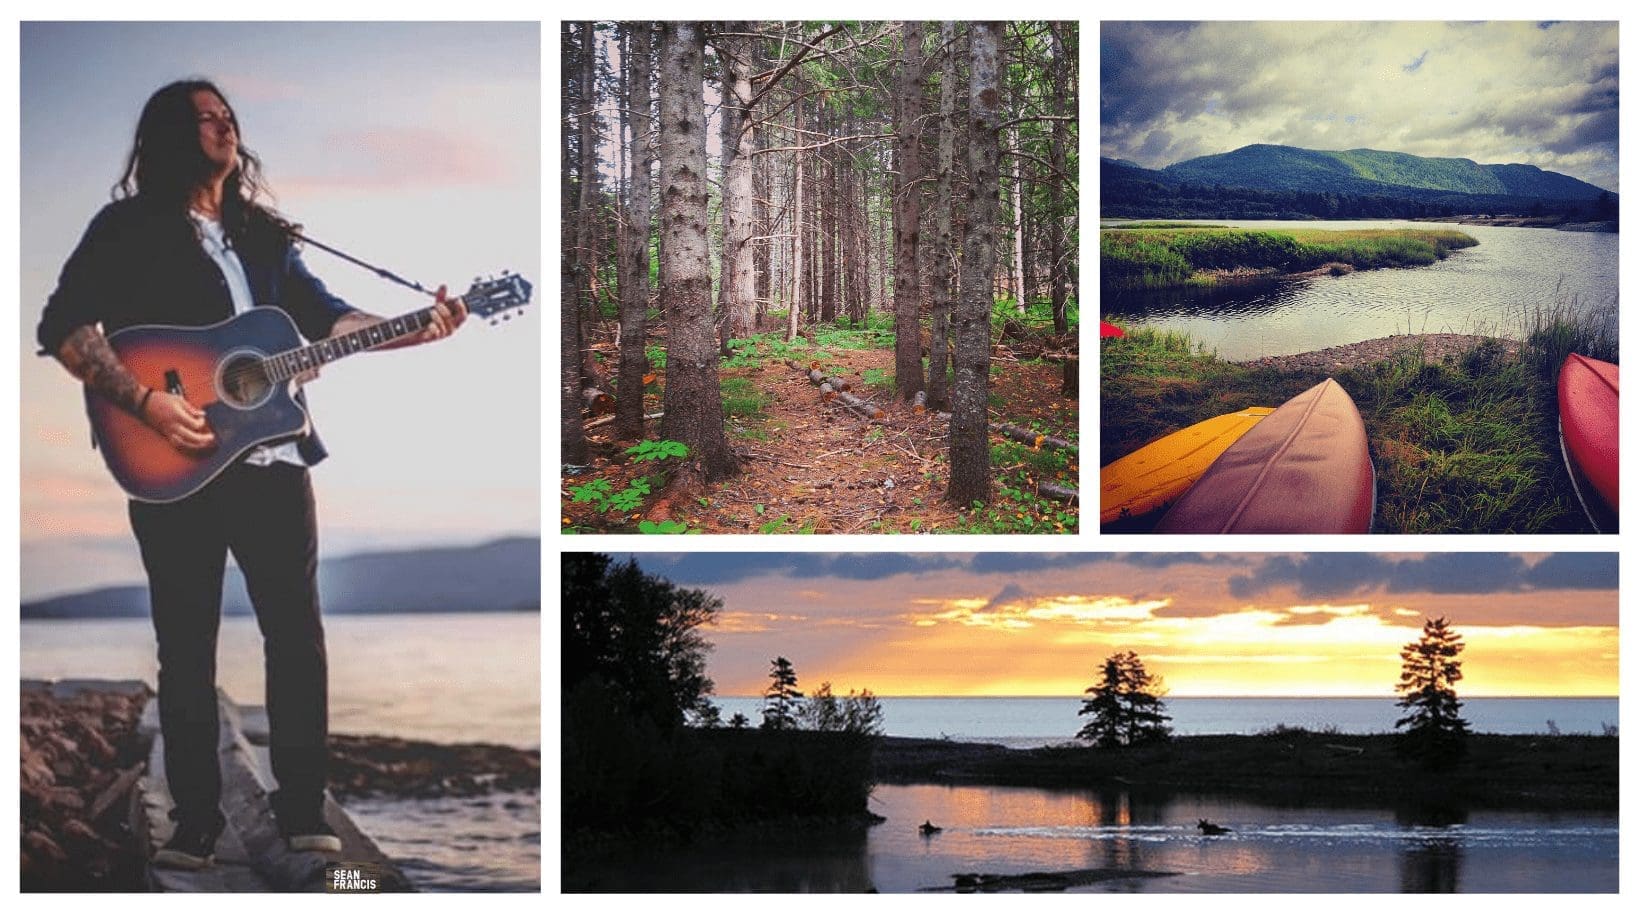 Collage of outdoor images